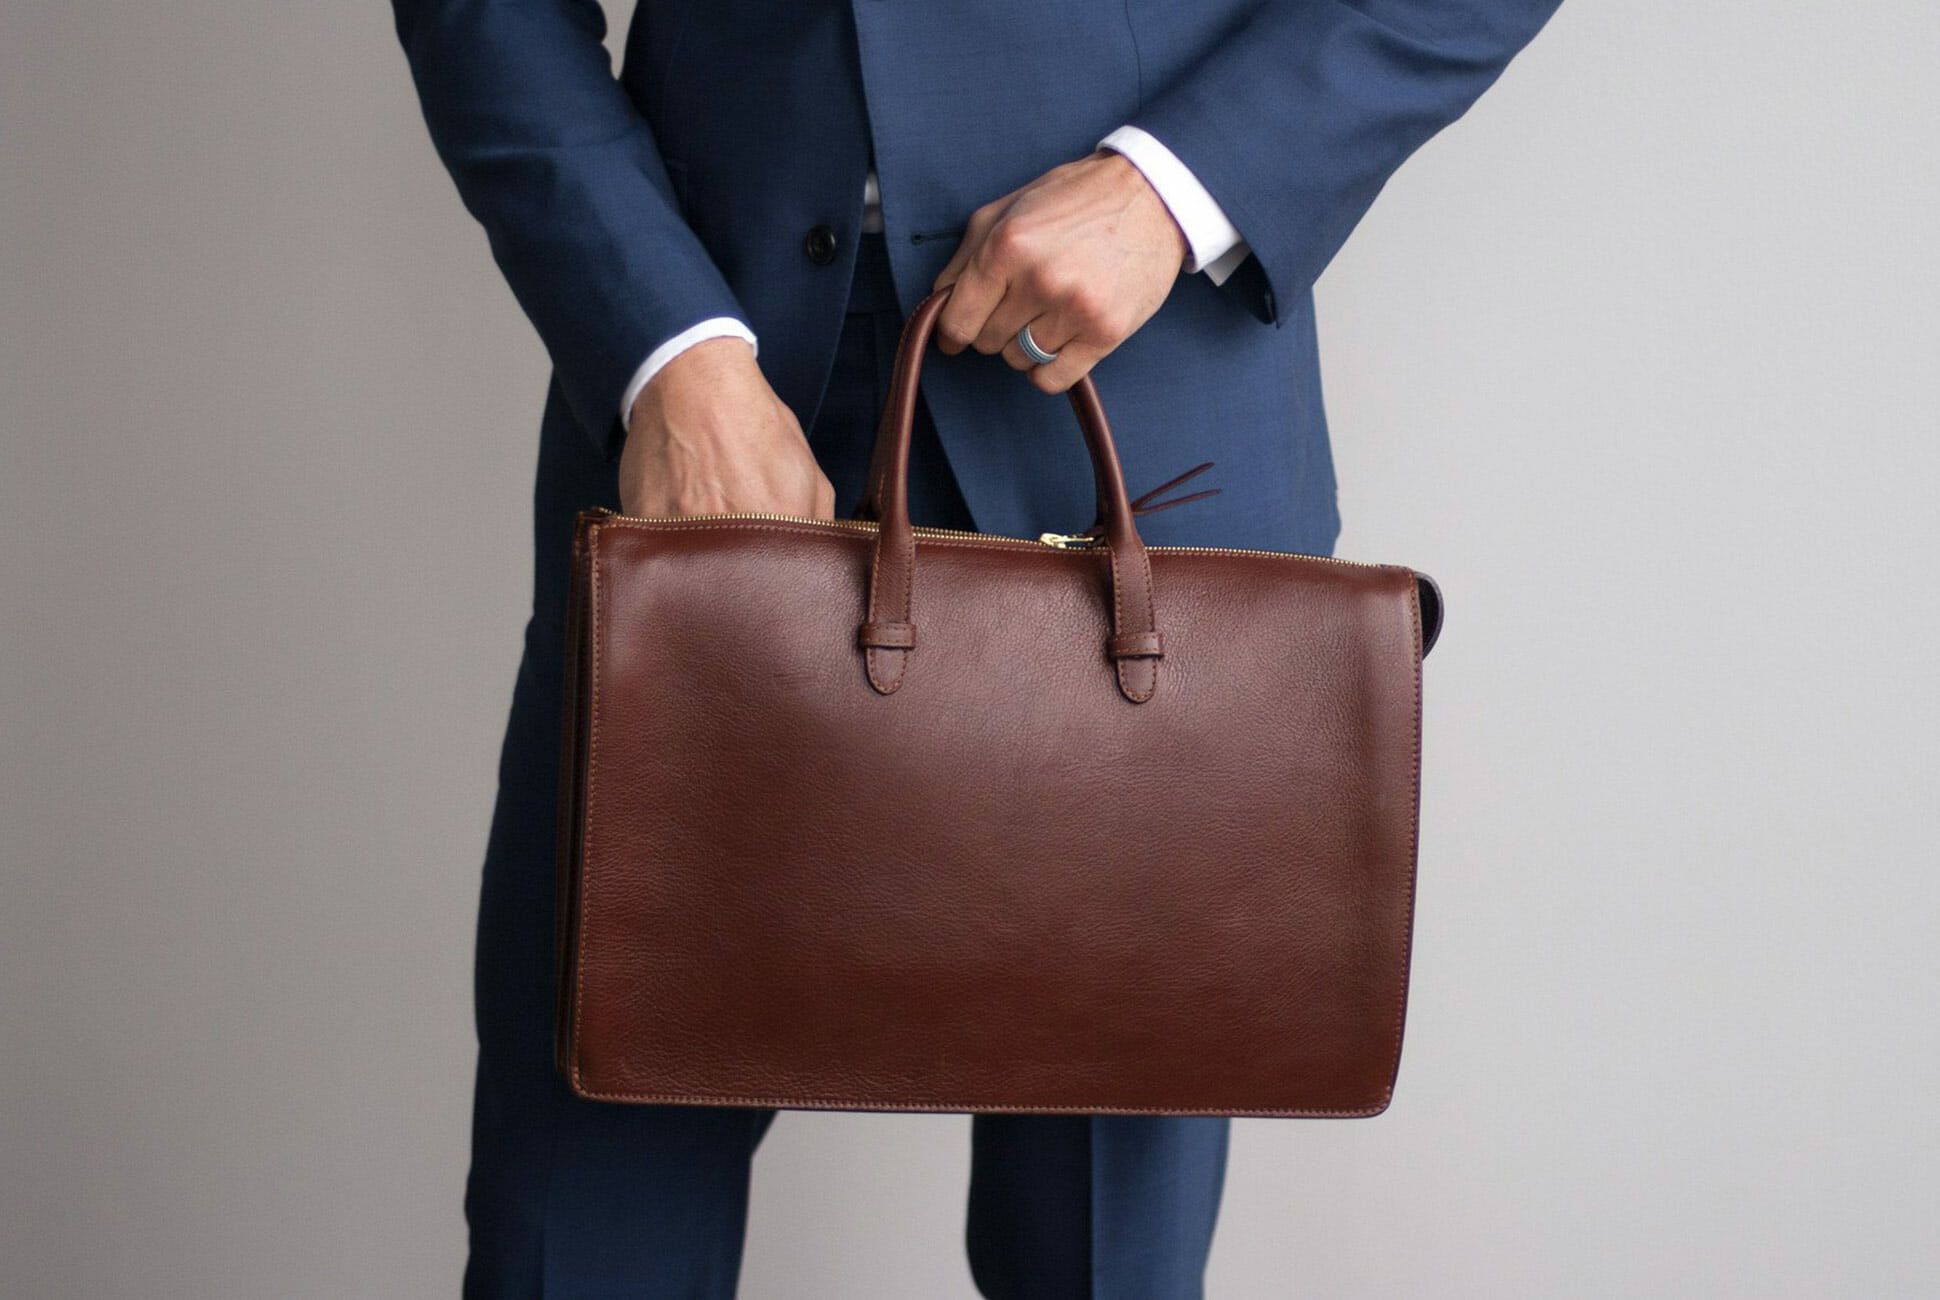 Discover the Best Leather Products for Your Lifestyle